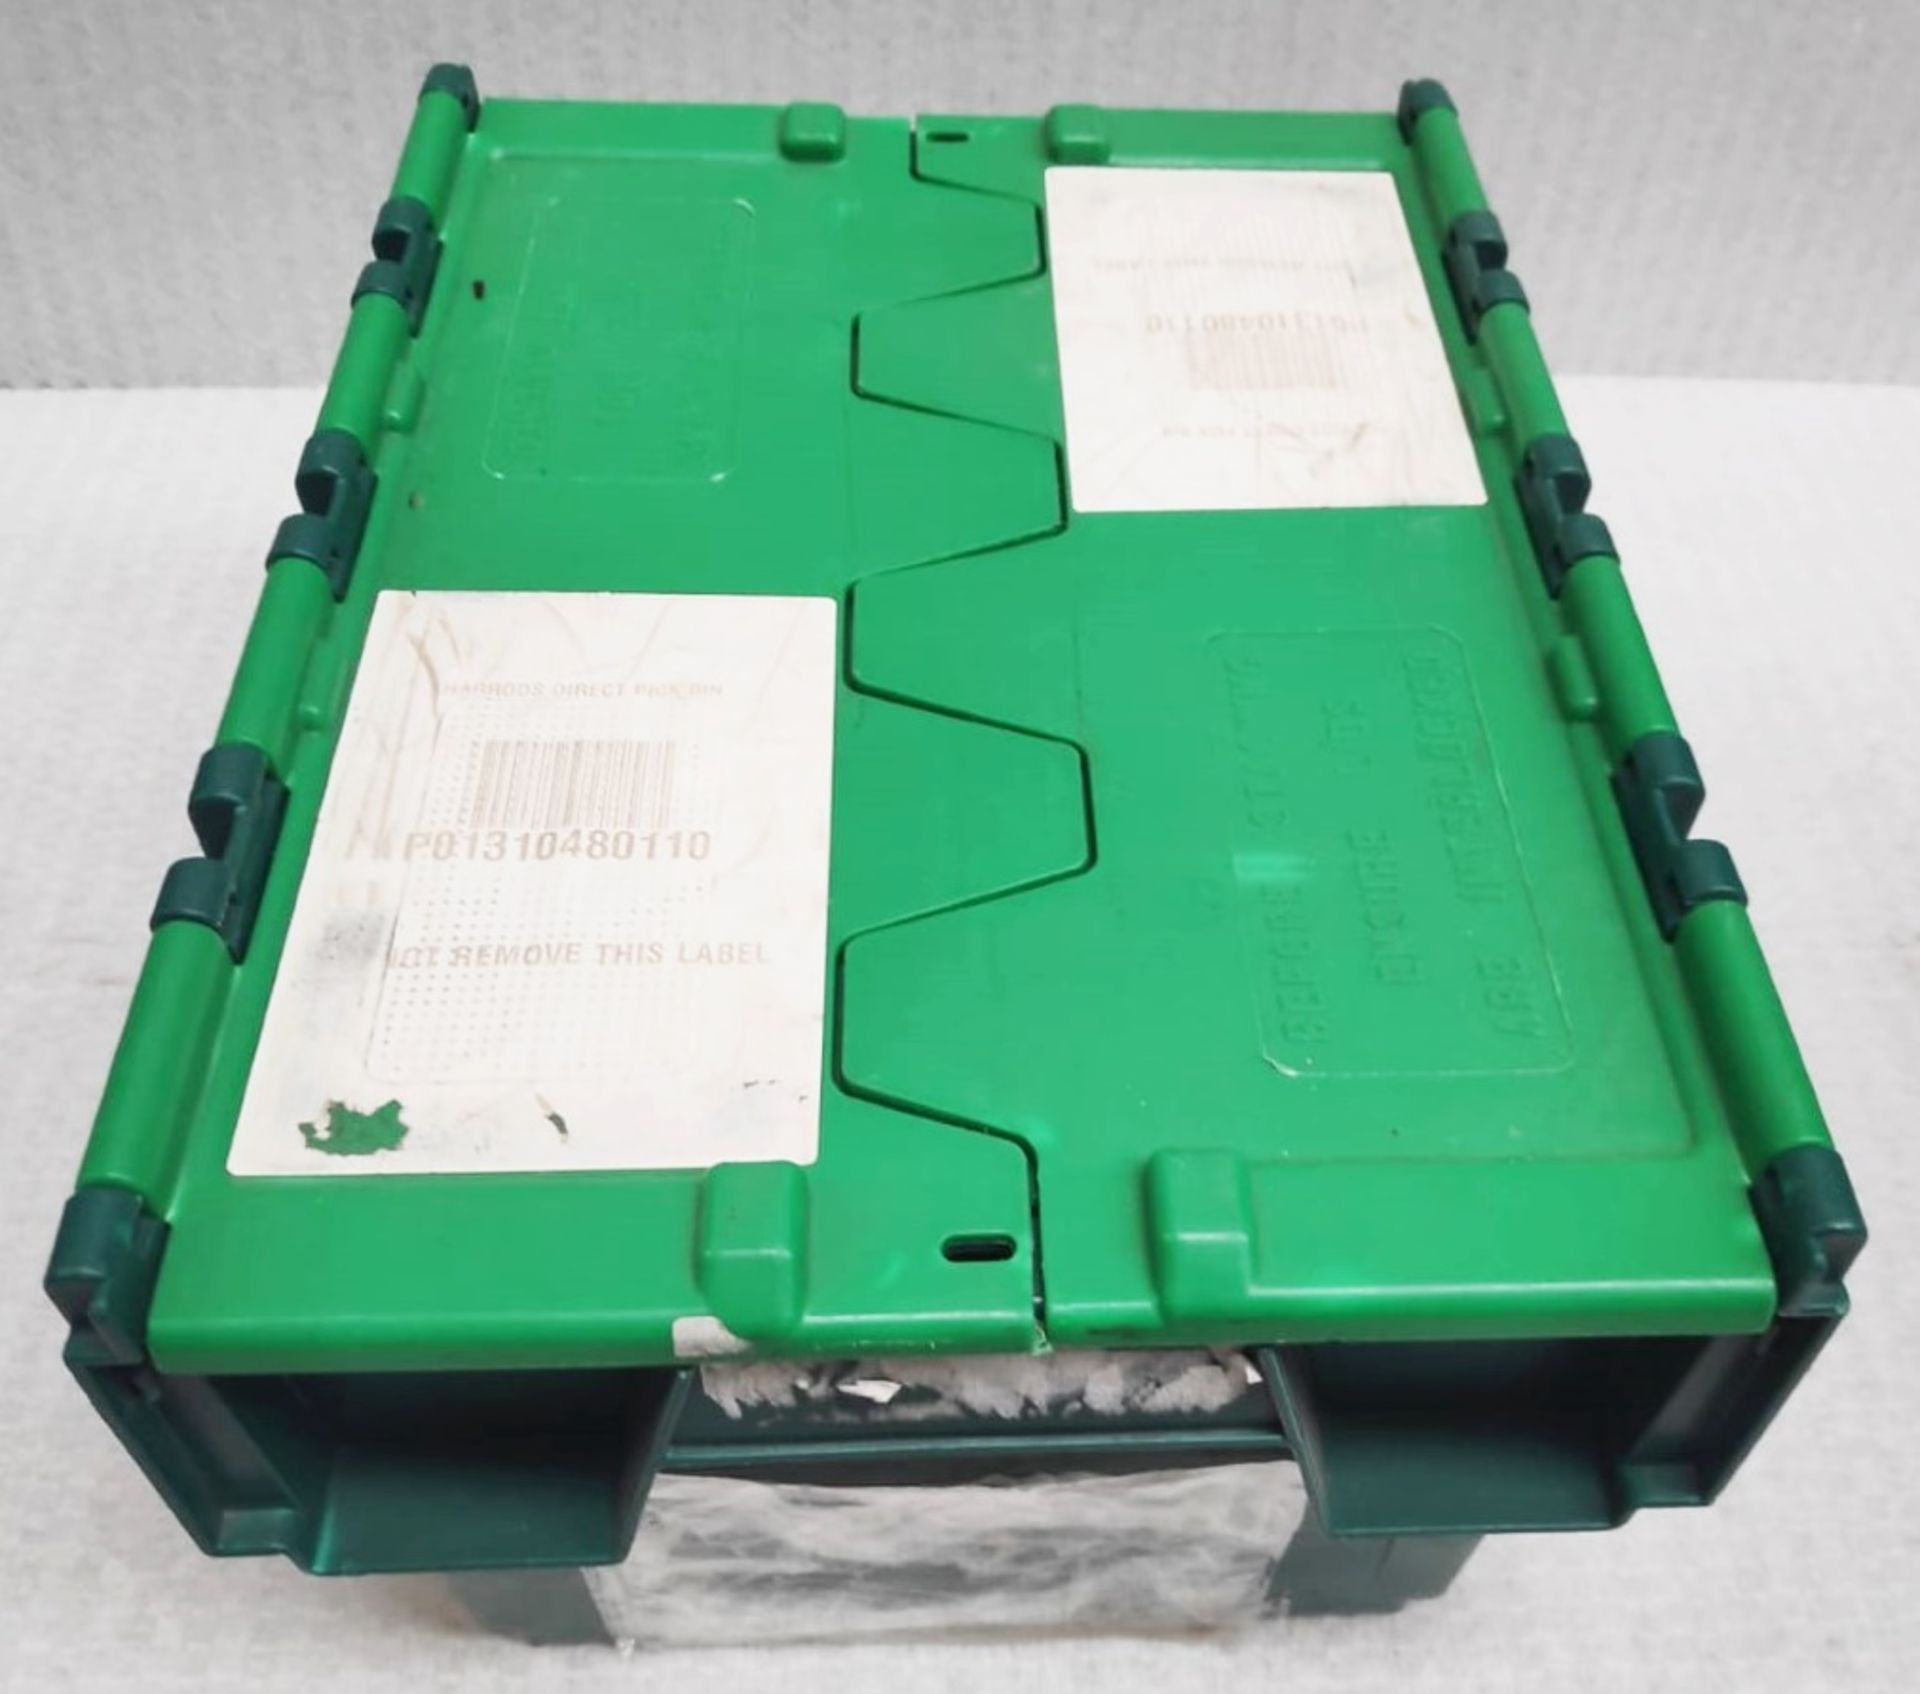 20 x Robust Compact Green Plastic Stackable Secure Storage Boxes With Attached Hinged Lids - Image 5 of 6